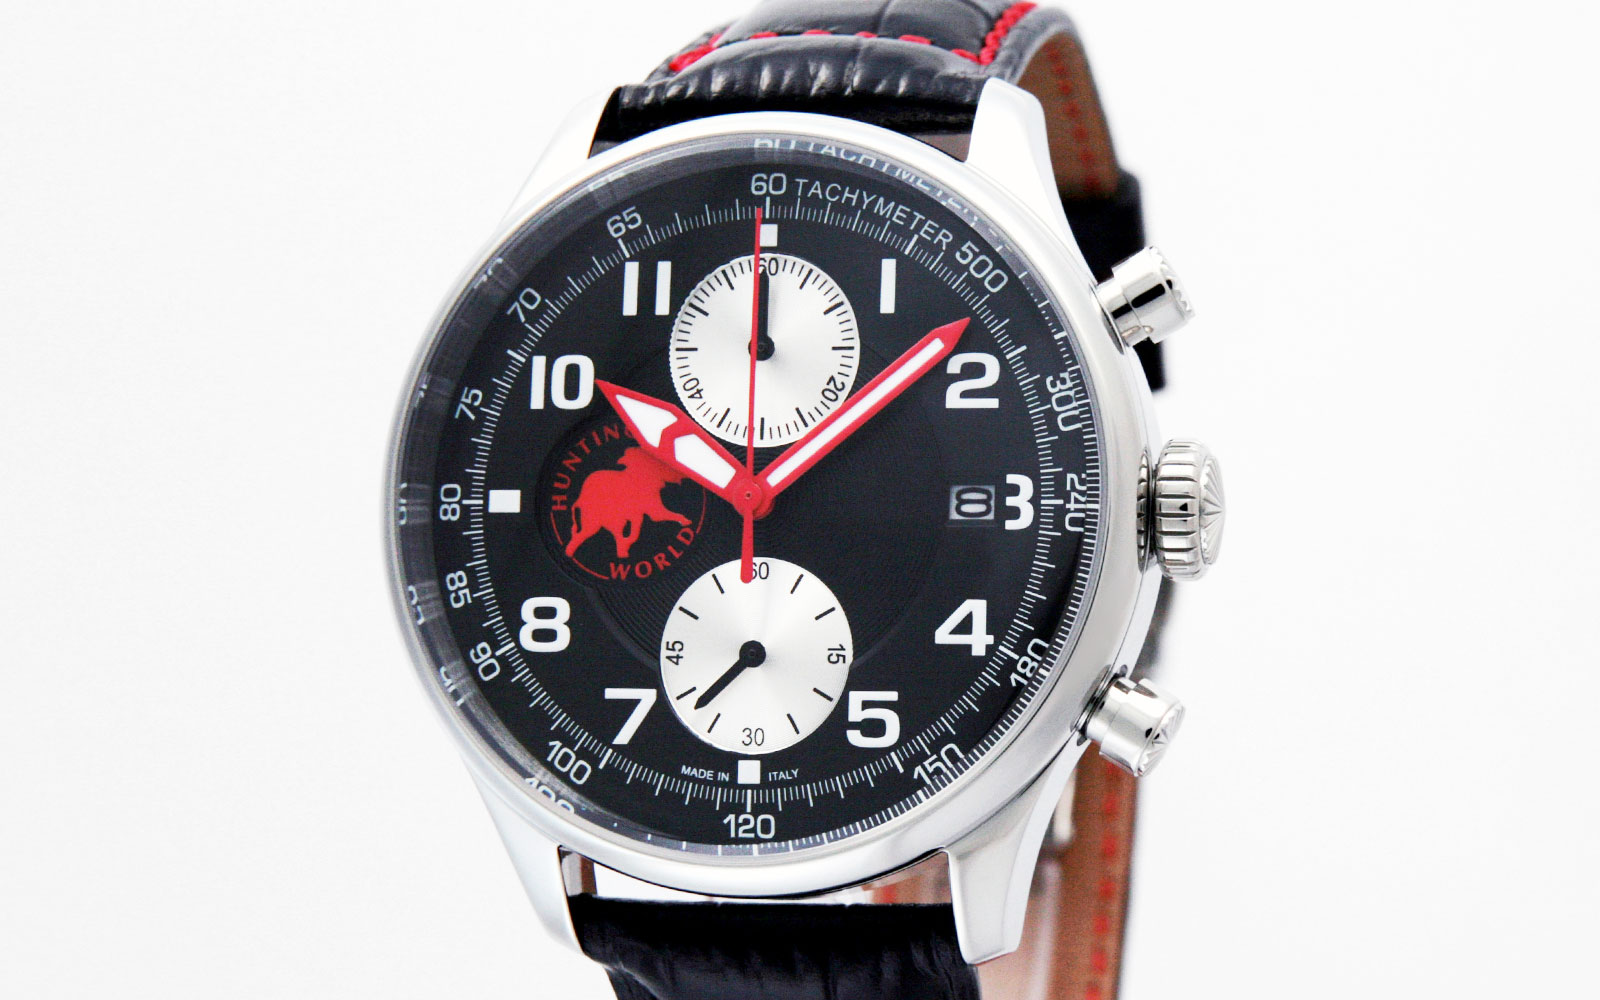 Hunting World Watches